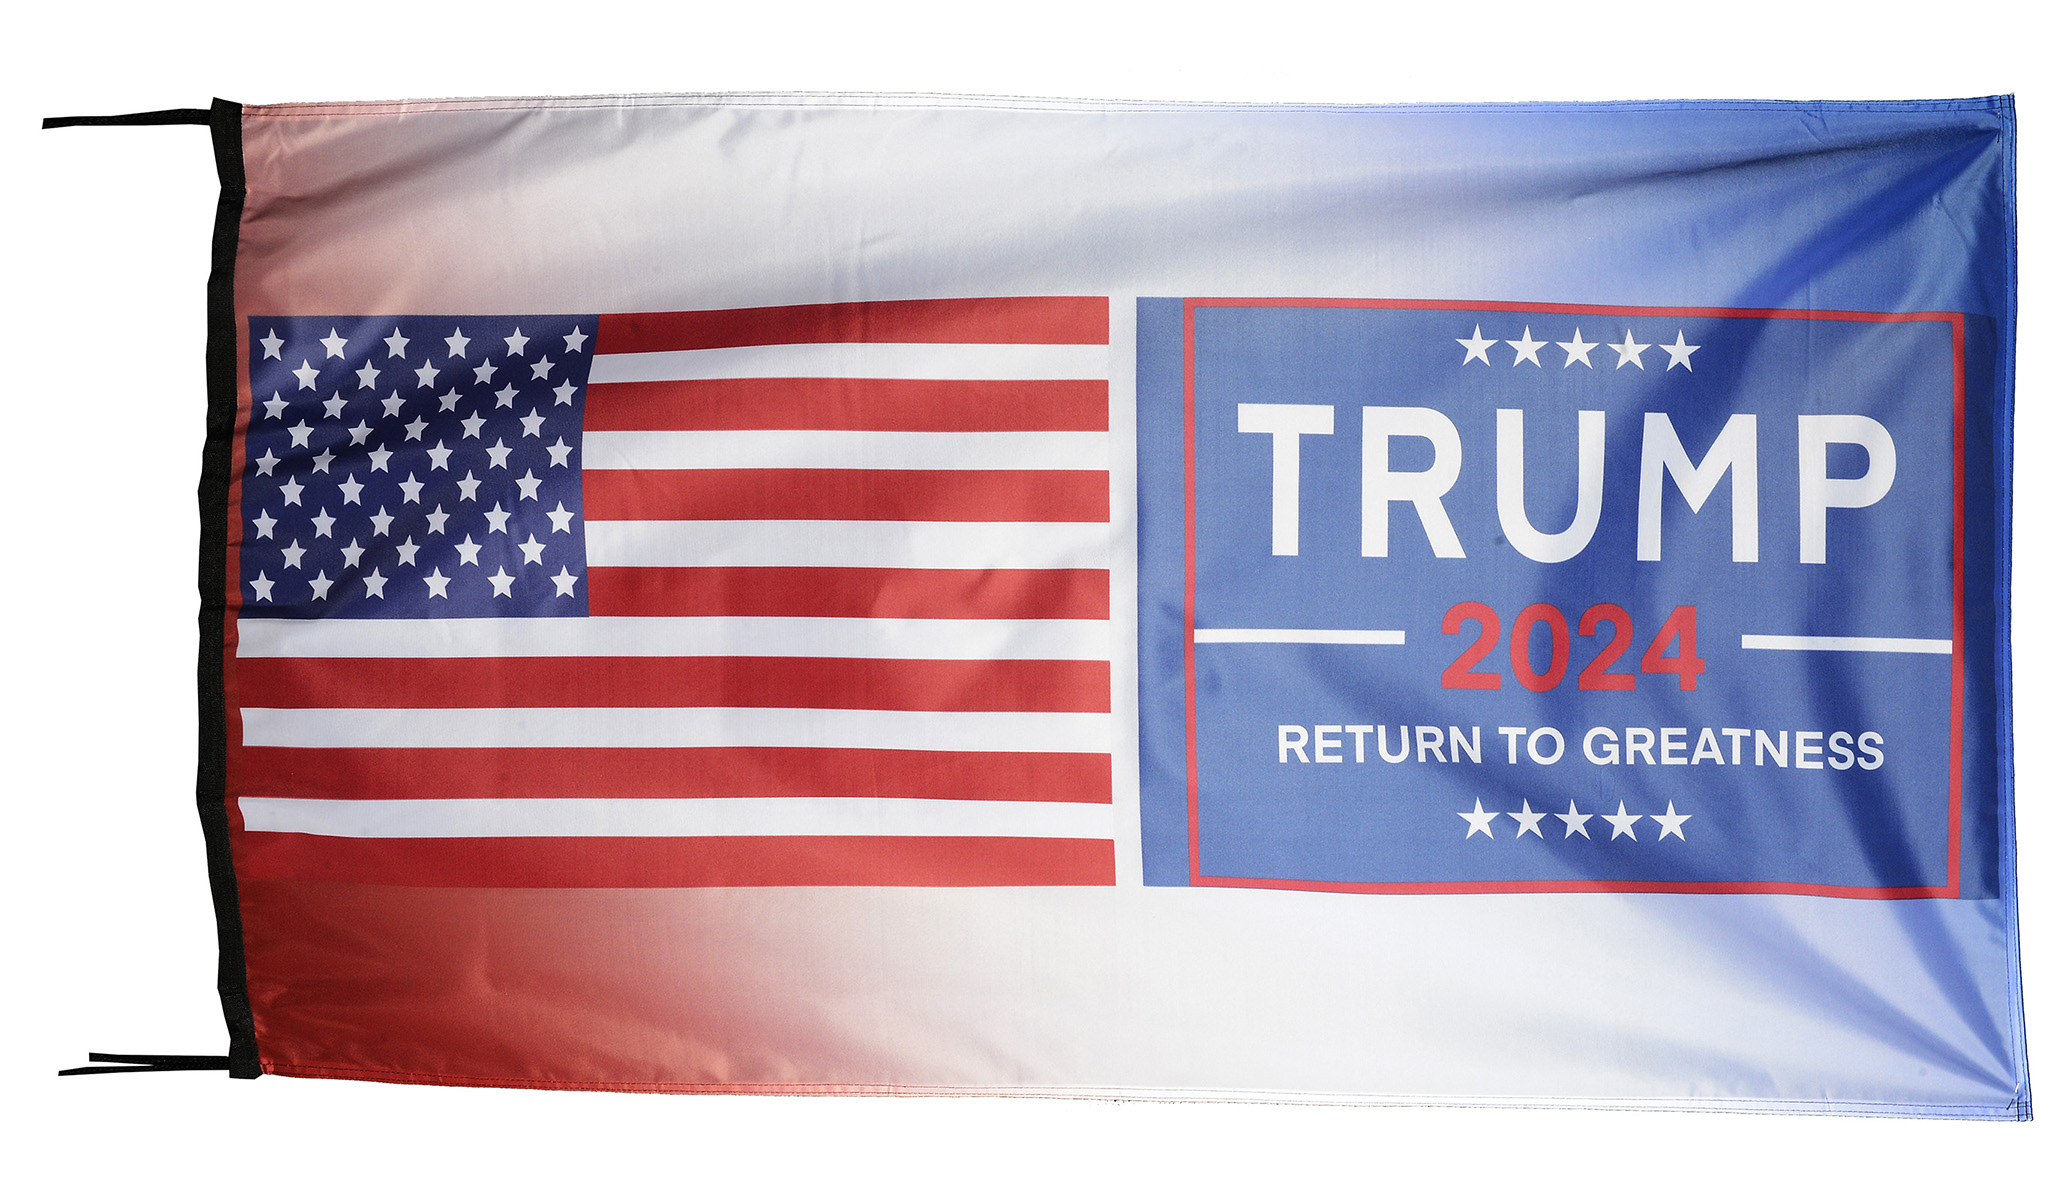 Flag  073 USA / US Country / United States Of America and New York City Flag / NYC / Manhattan / New Yorker / Pride Hybrid Weather-Resistant Polyester Outdoor Flag Landscape Banner / Vivid Colors / 3 X 5 FT (150 x 90cm) International Flags for Sale